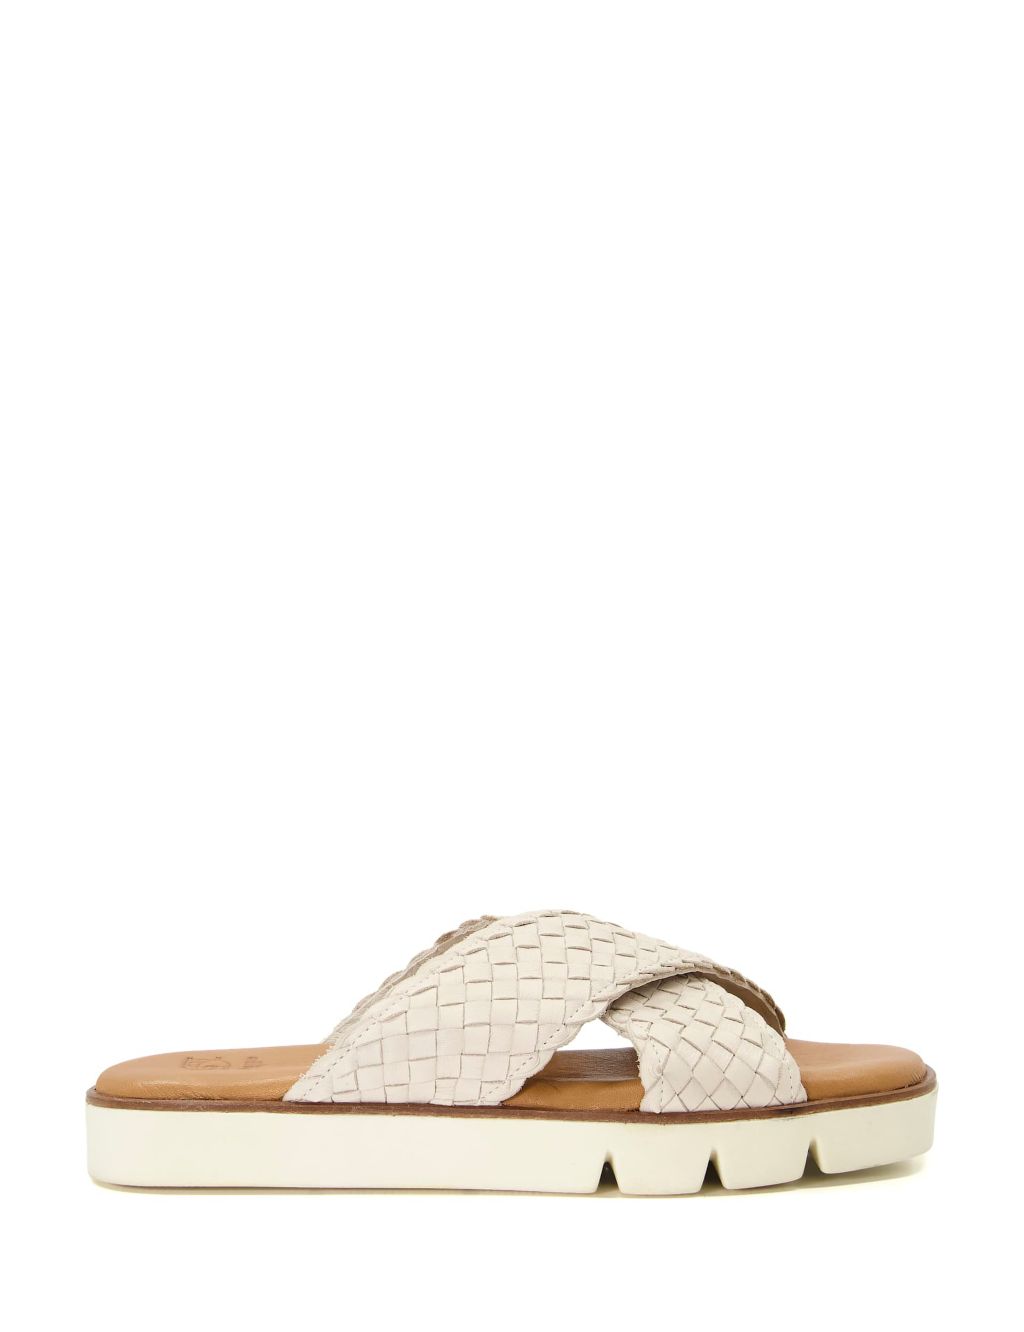 Leather Woven Crossover Flat Sliders image 1